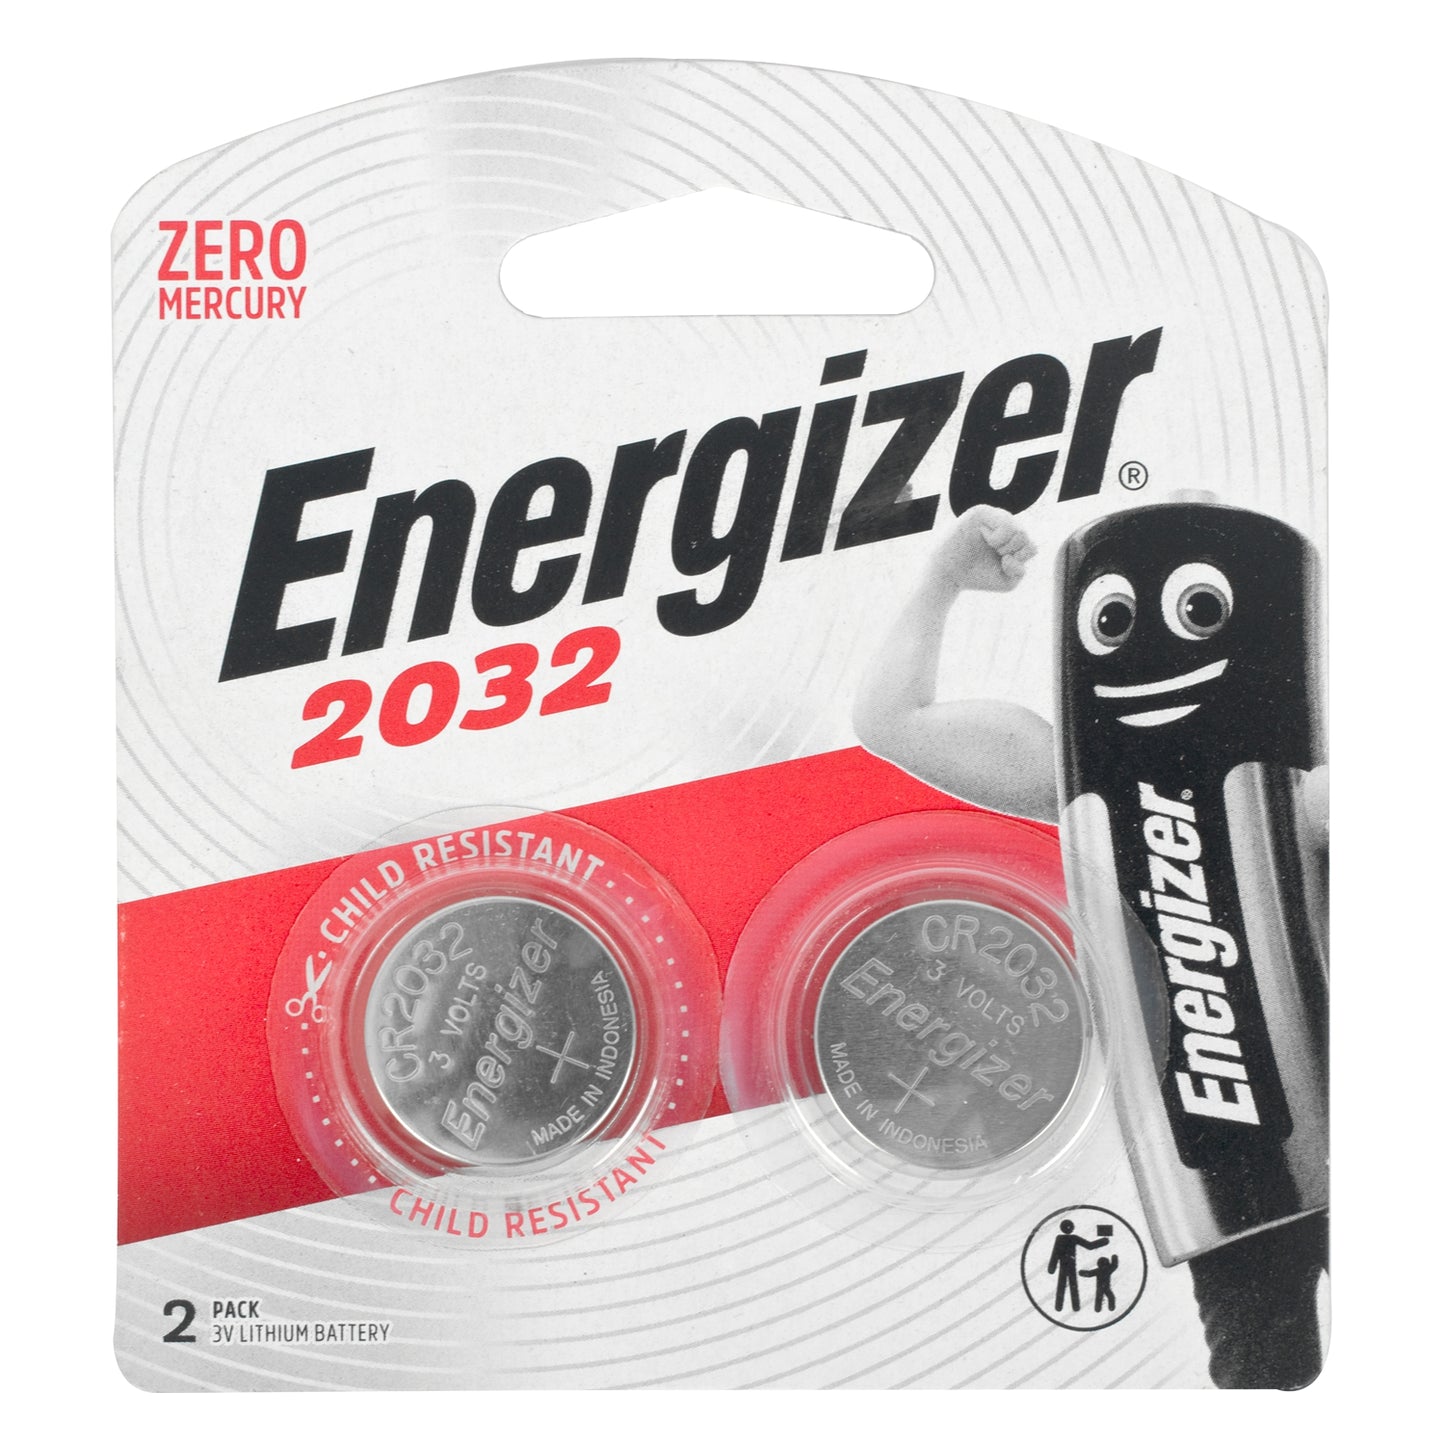 Energizer 2032 3v lithium coin battery 2 pack (moq x12)